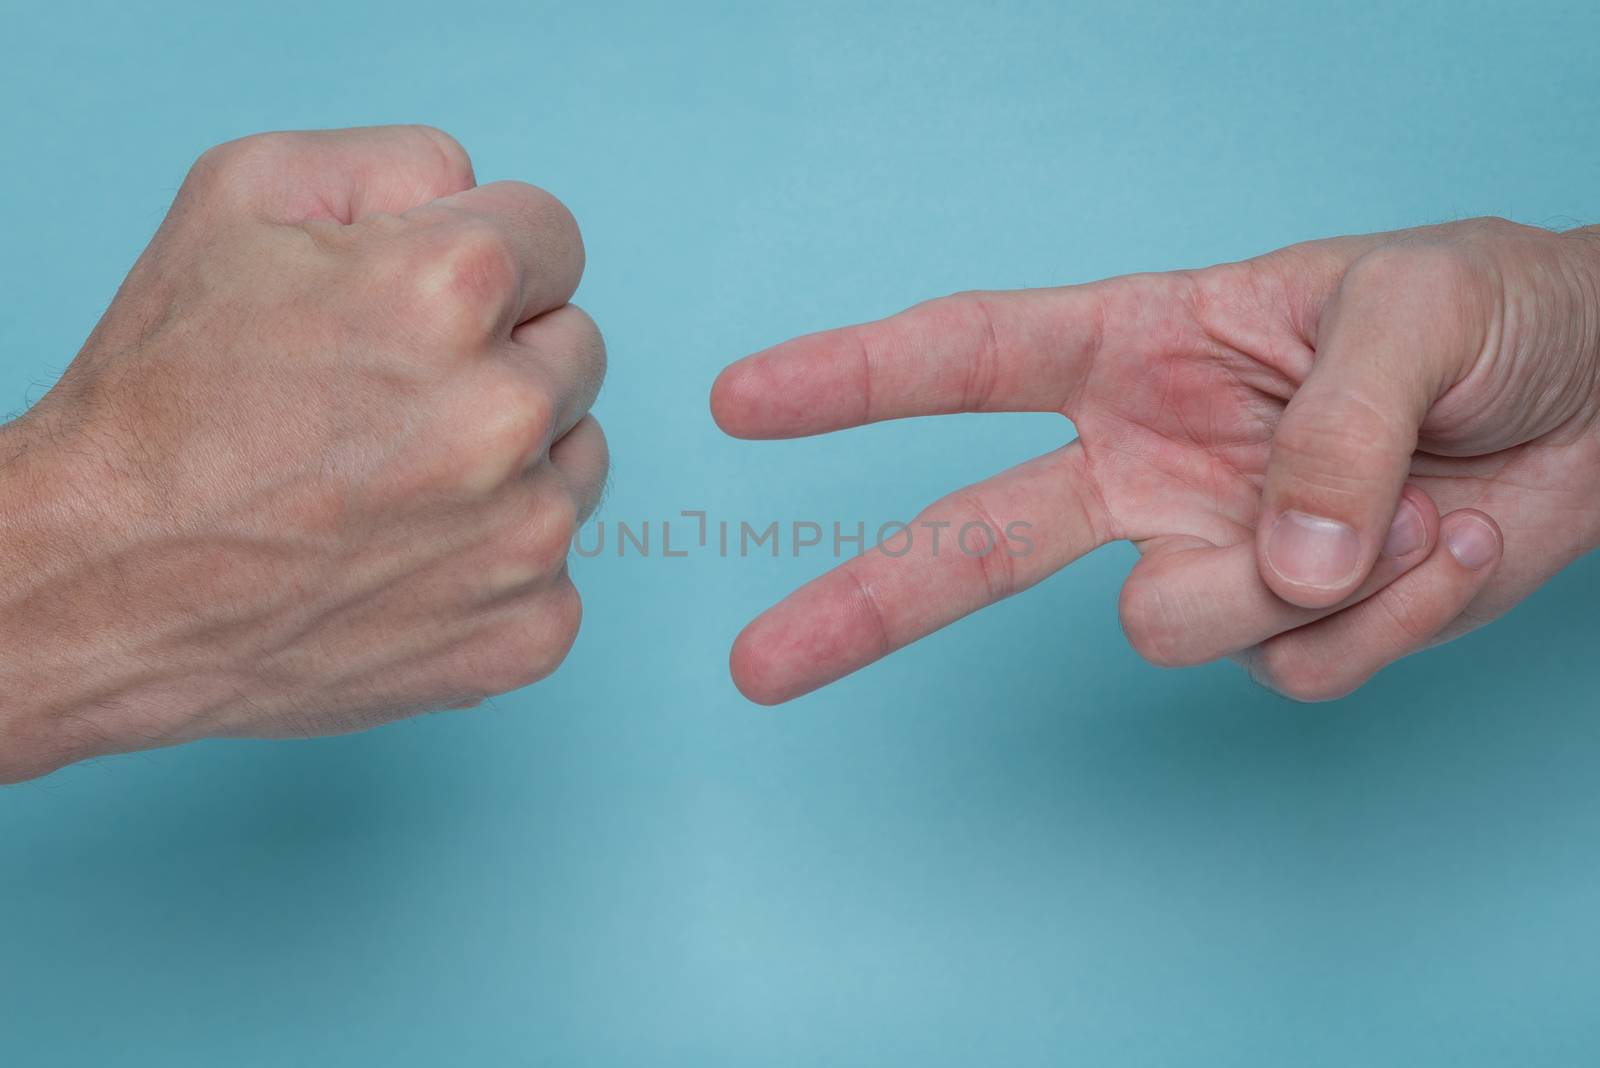 Men's hands playing rock, paper, scissors on a light blue background. One is throwing rock, the other is throwing scissors.